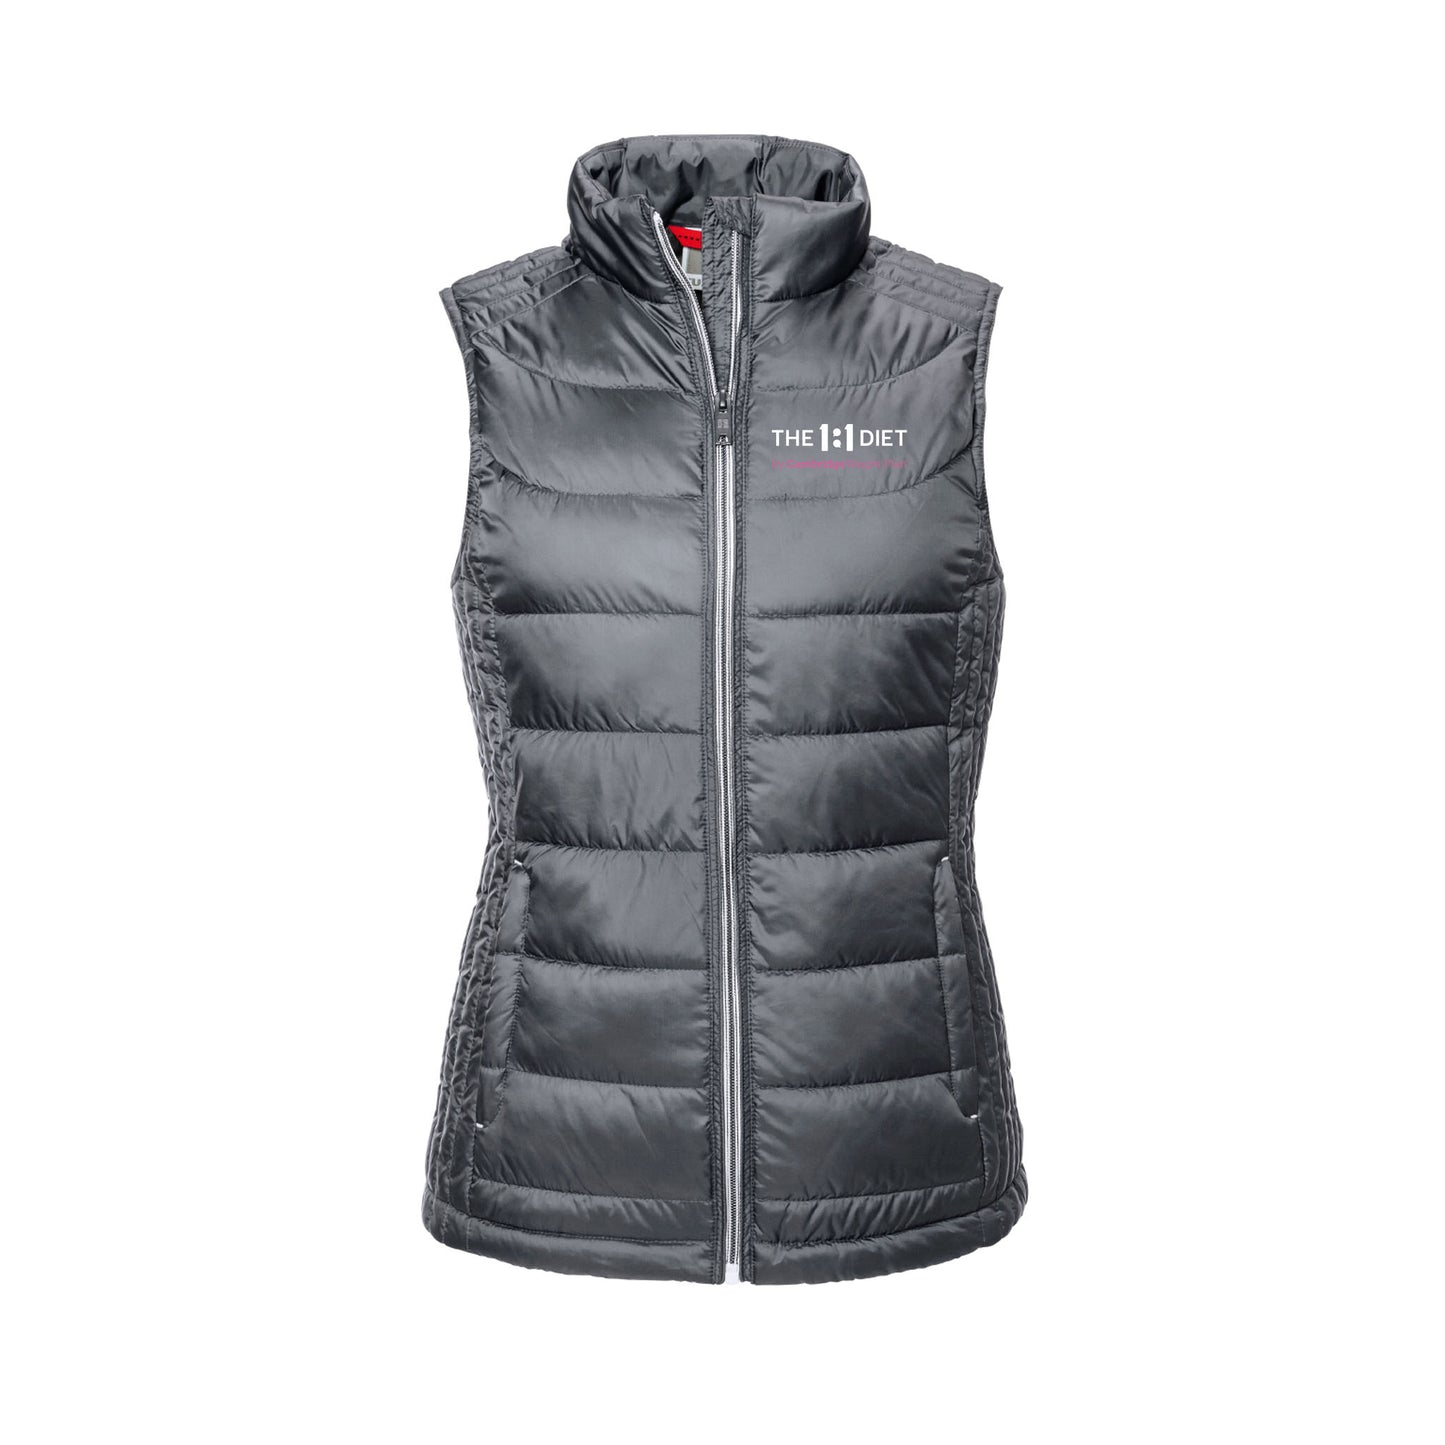 The 1:1 Diet - Ladies Russell Nano Gilet